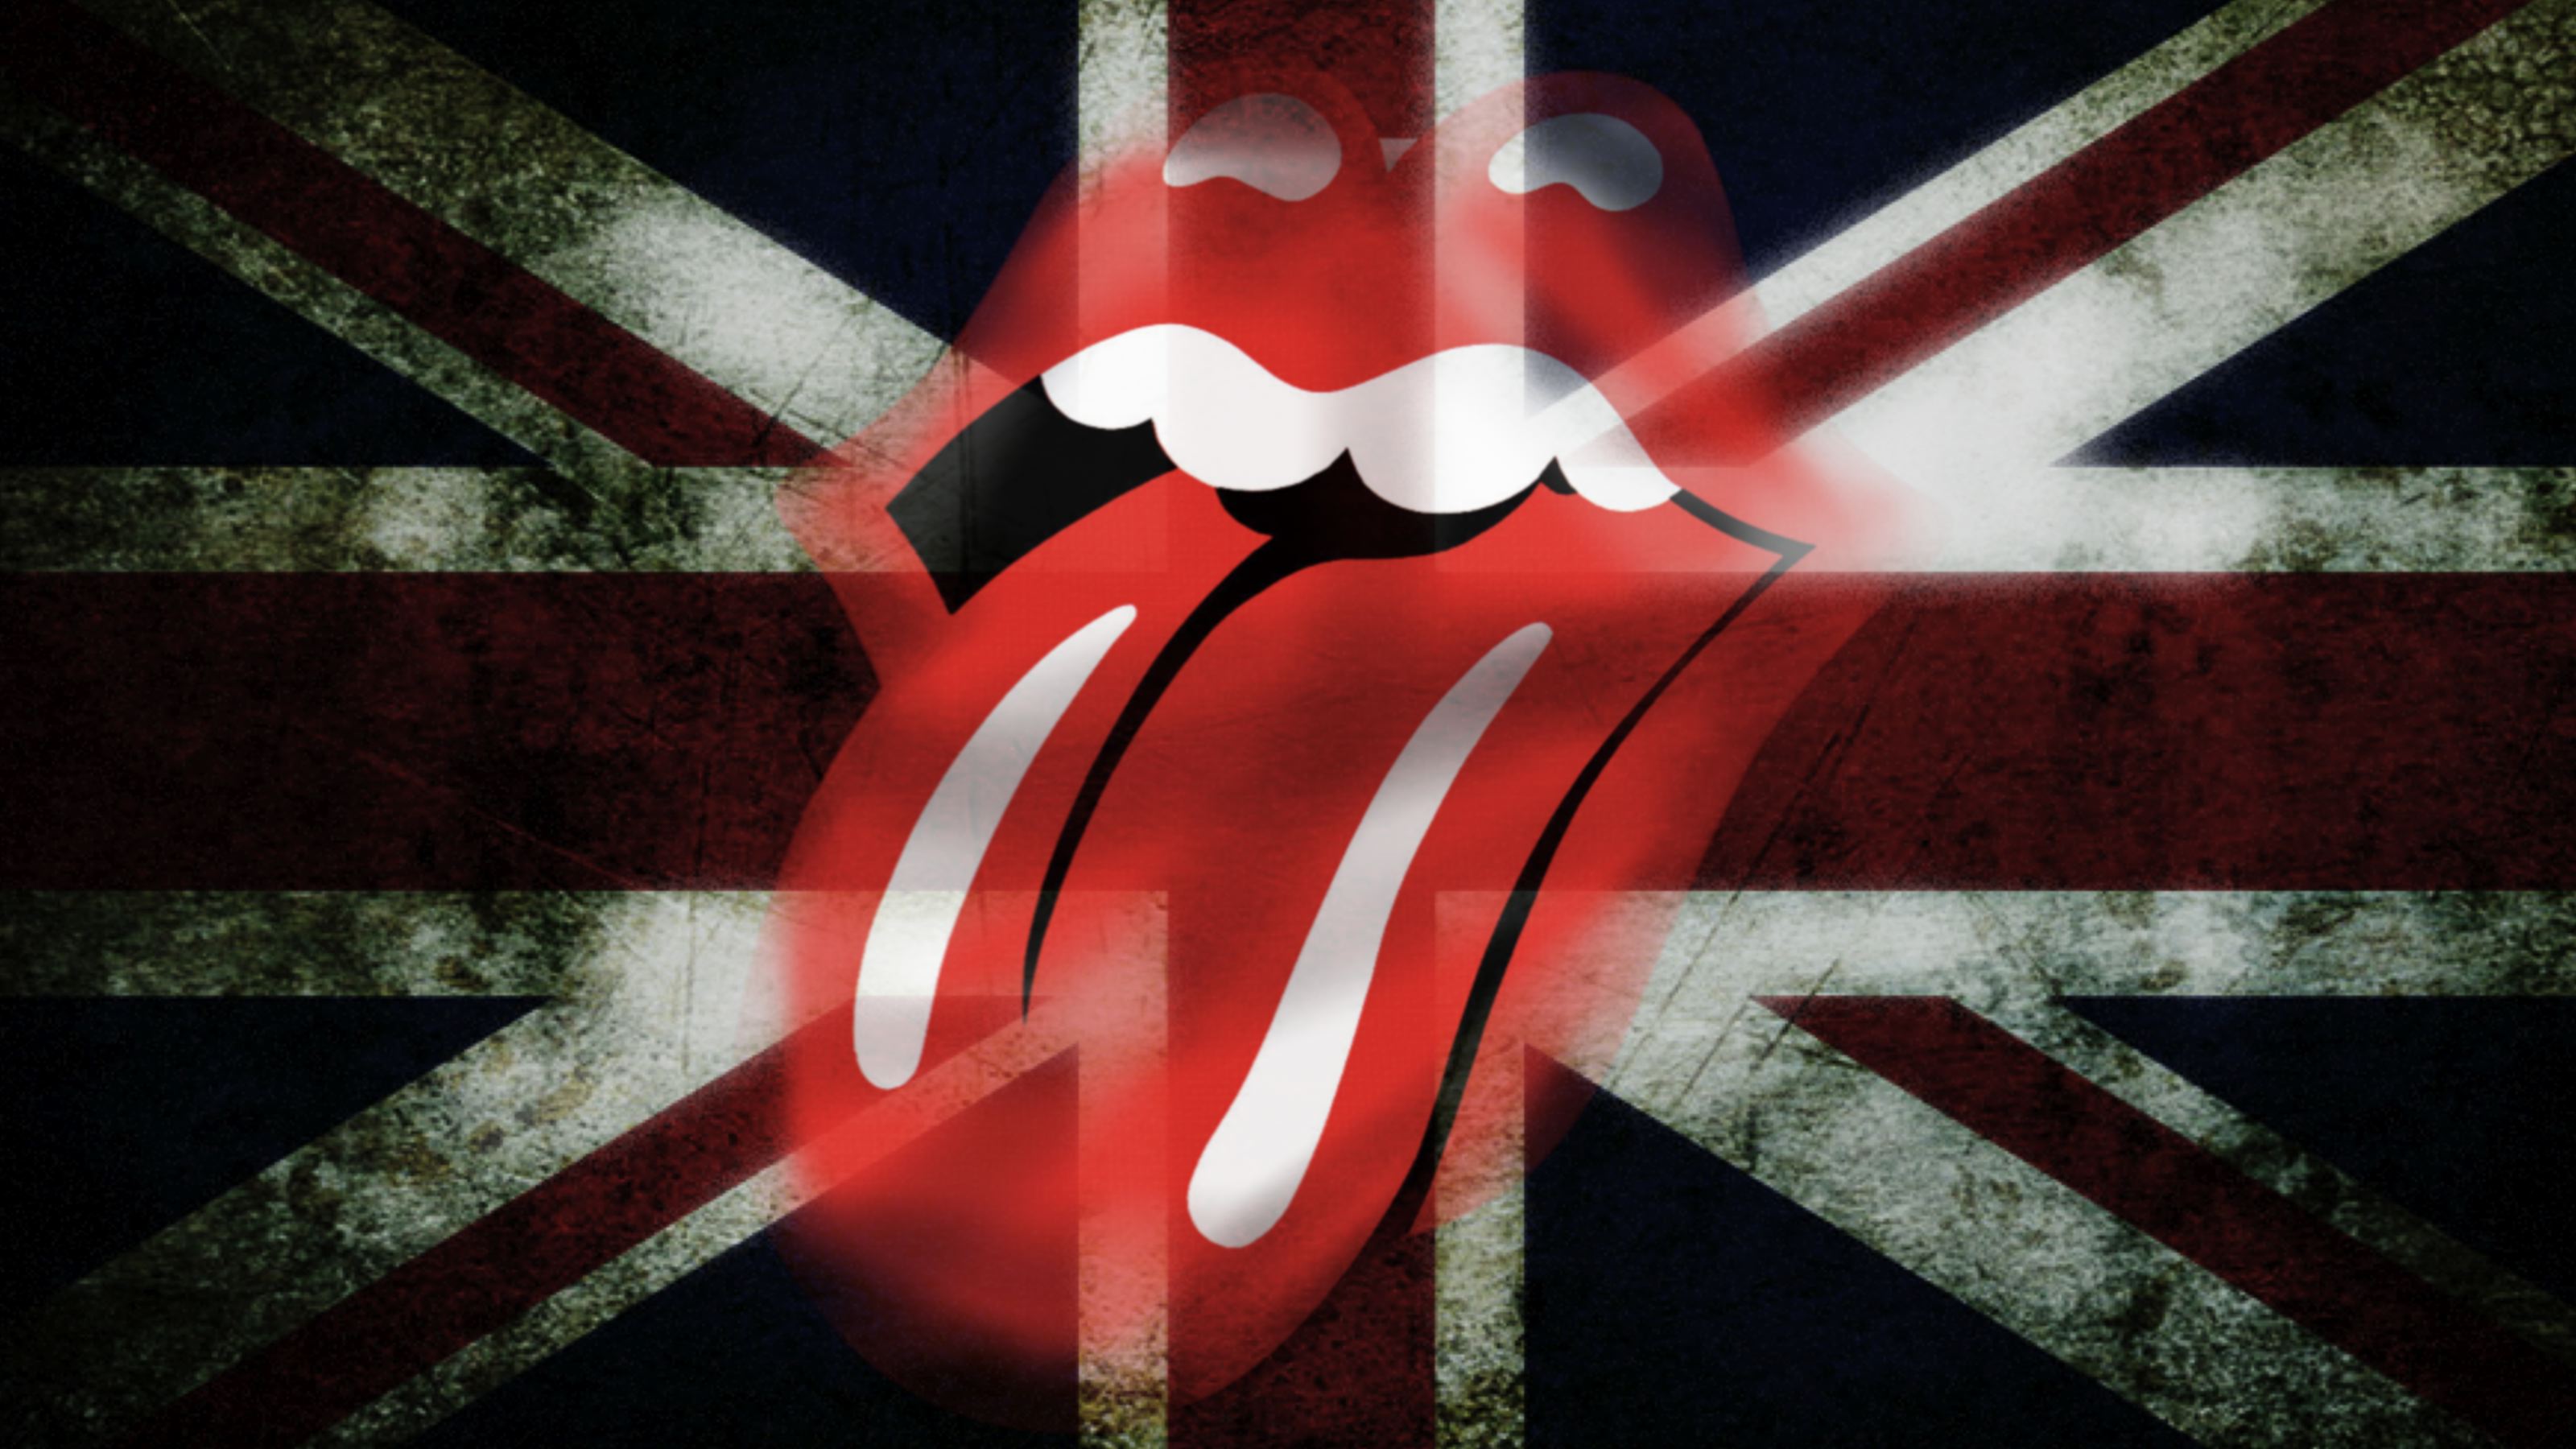 The Rolling Stones Logo Wallpaper The rolling stones